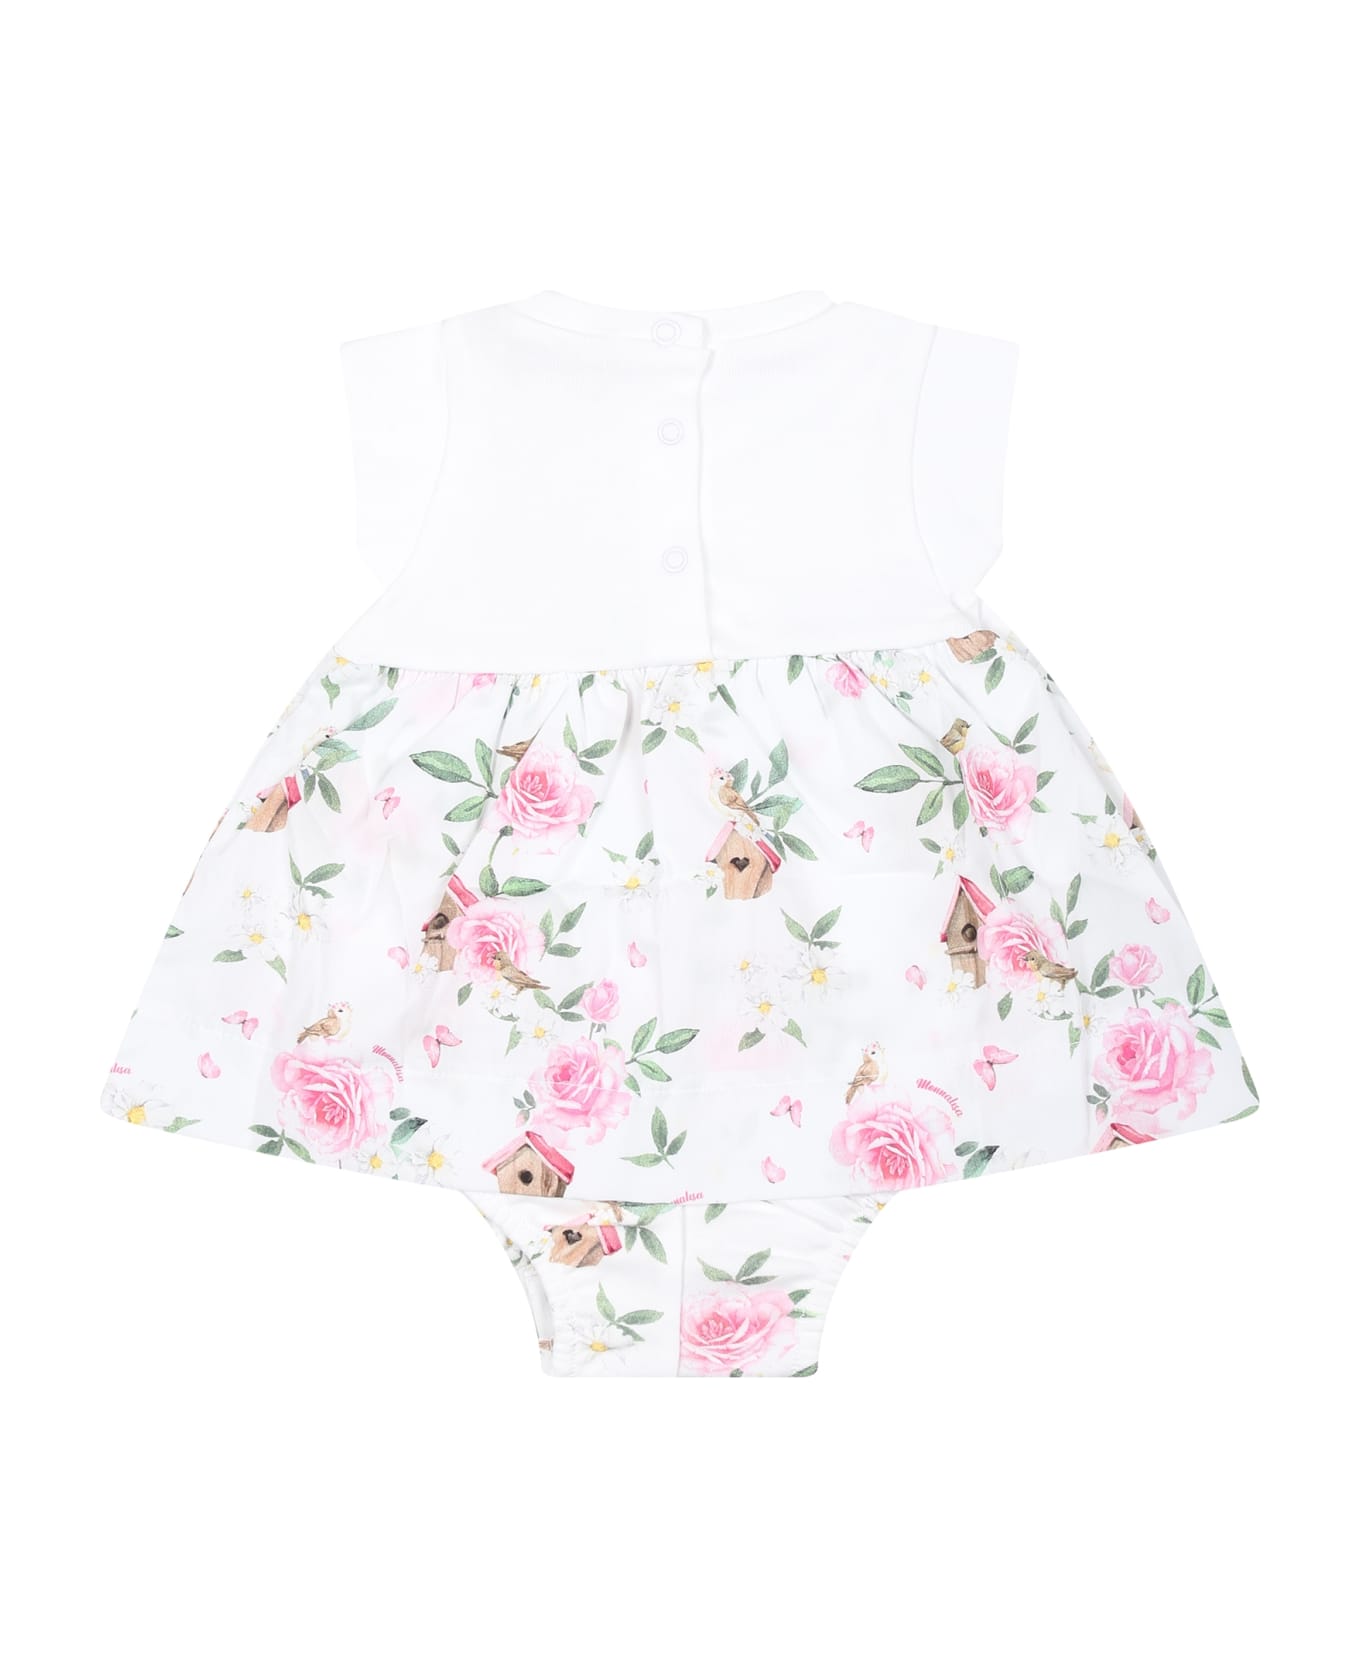 Monnalisa White Romper For Baby Girl With Flowers Print - White